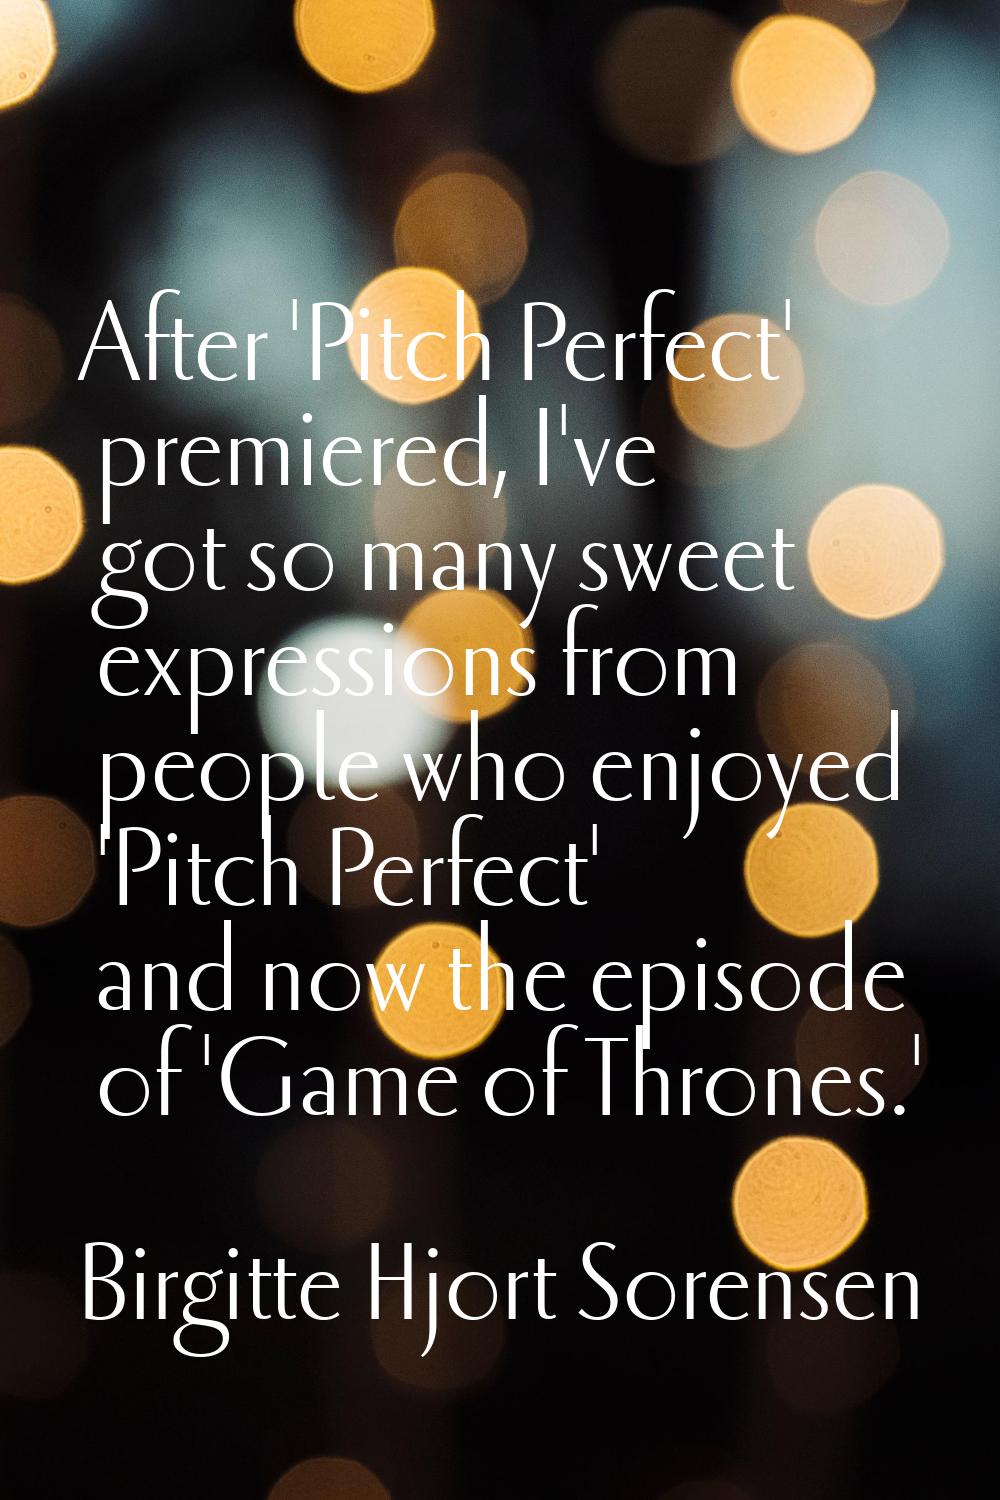 After 'Pitch Perfect' premiered, I've got so many sweet expressions from people who enjoyed 'Pitch 